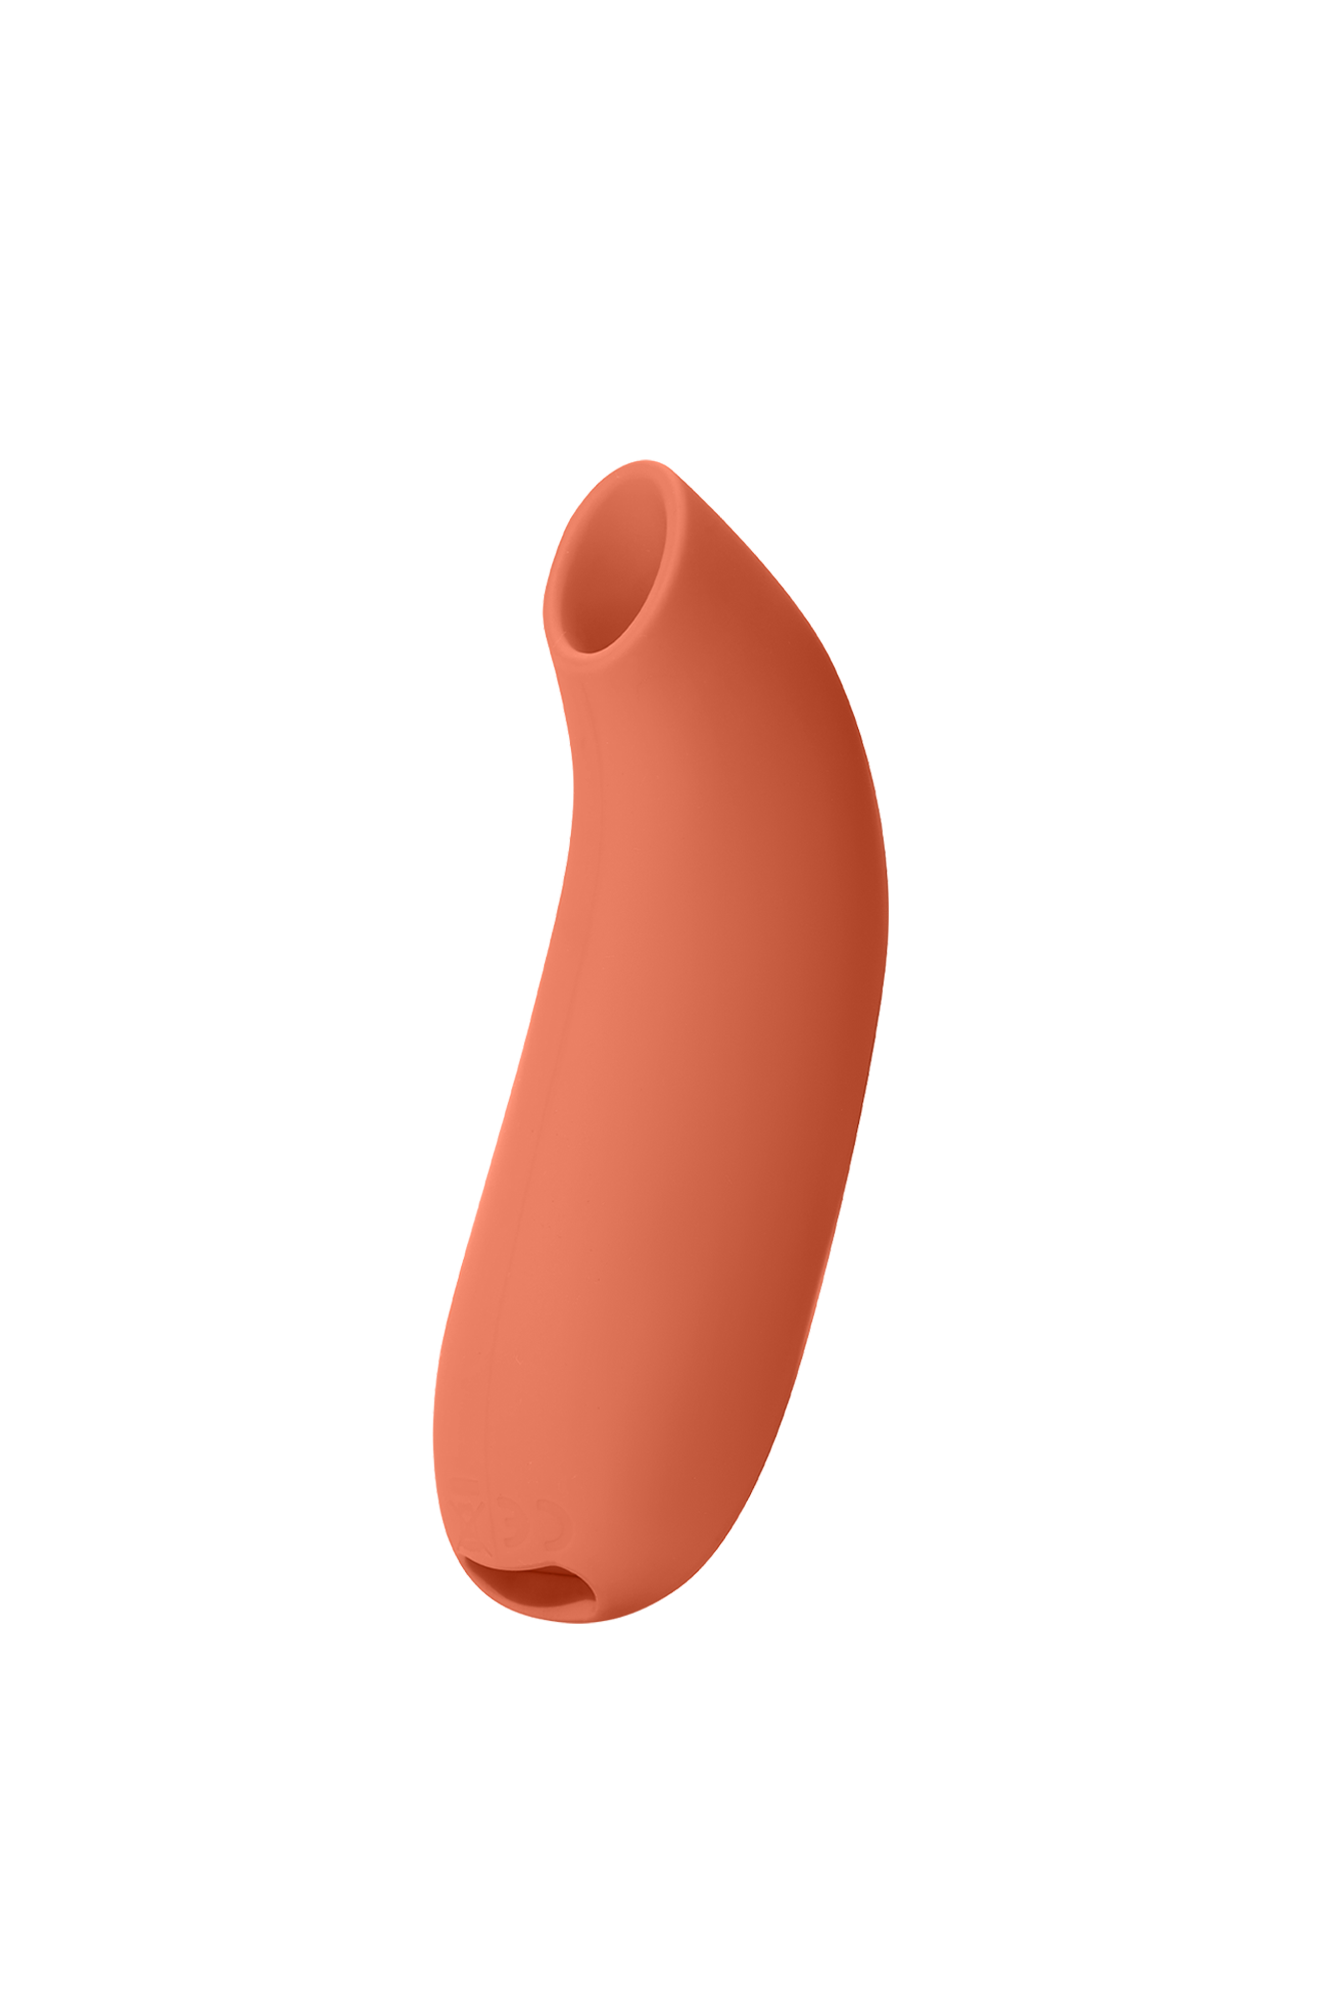 dame aer suction toy